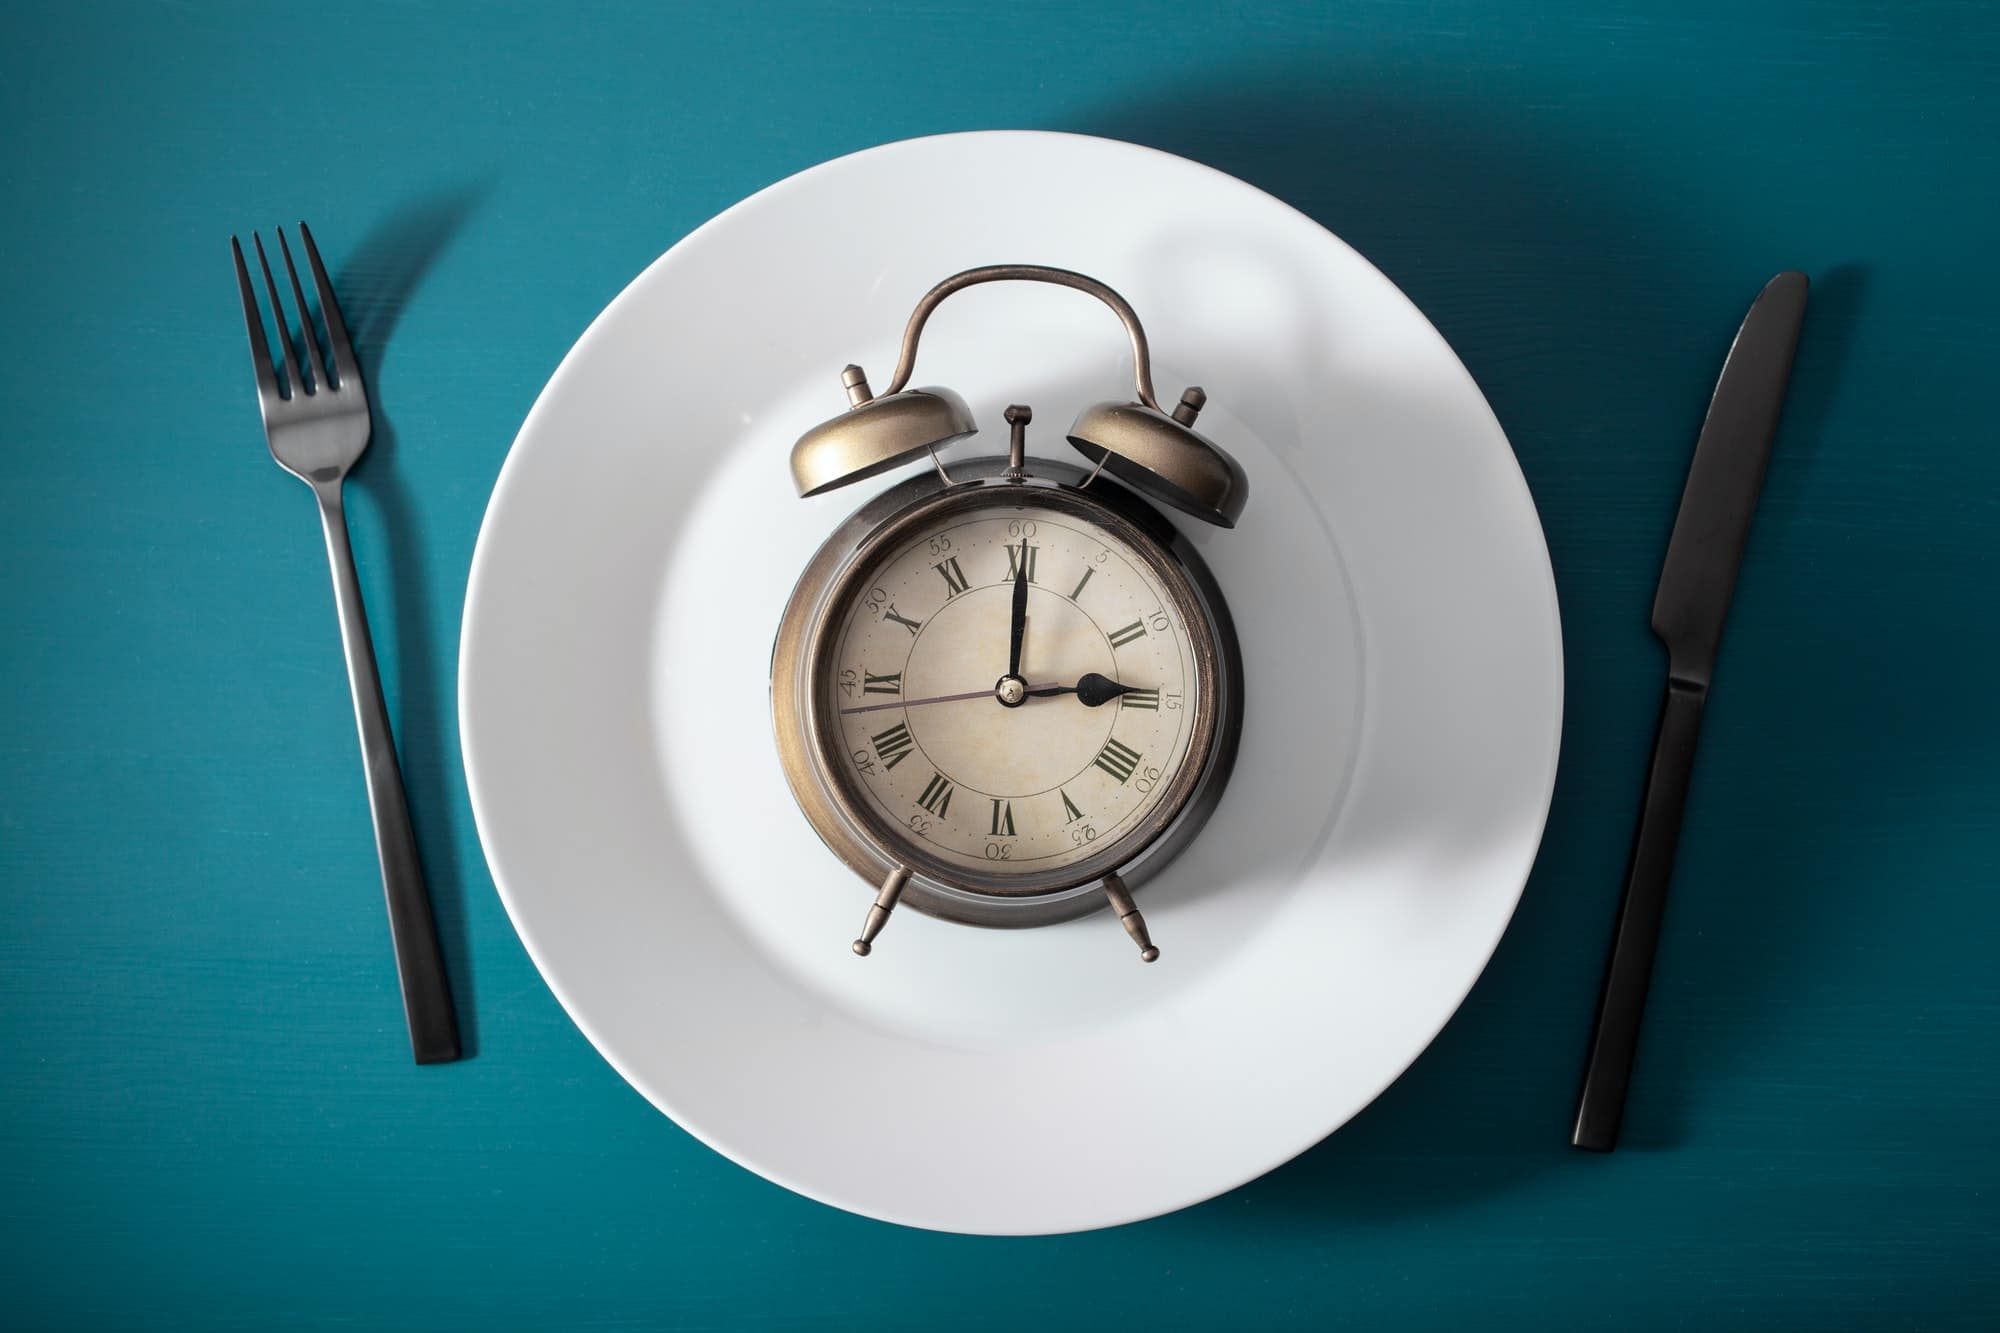 concept of intermittent fasting, ketogenic diet, weight loss